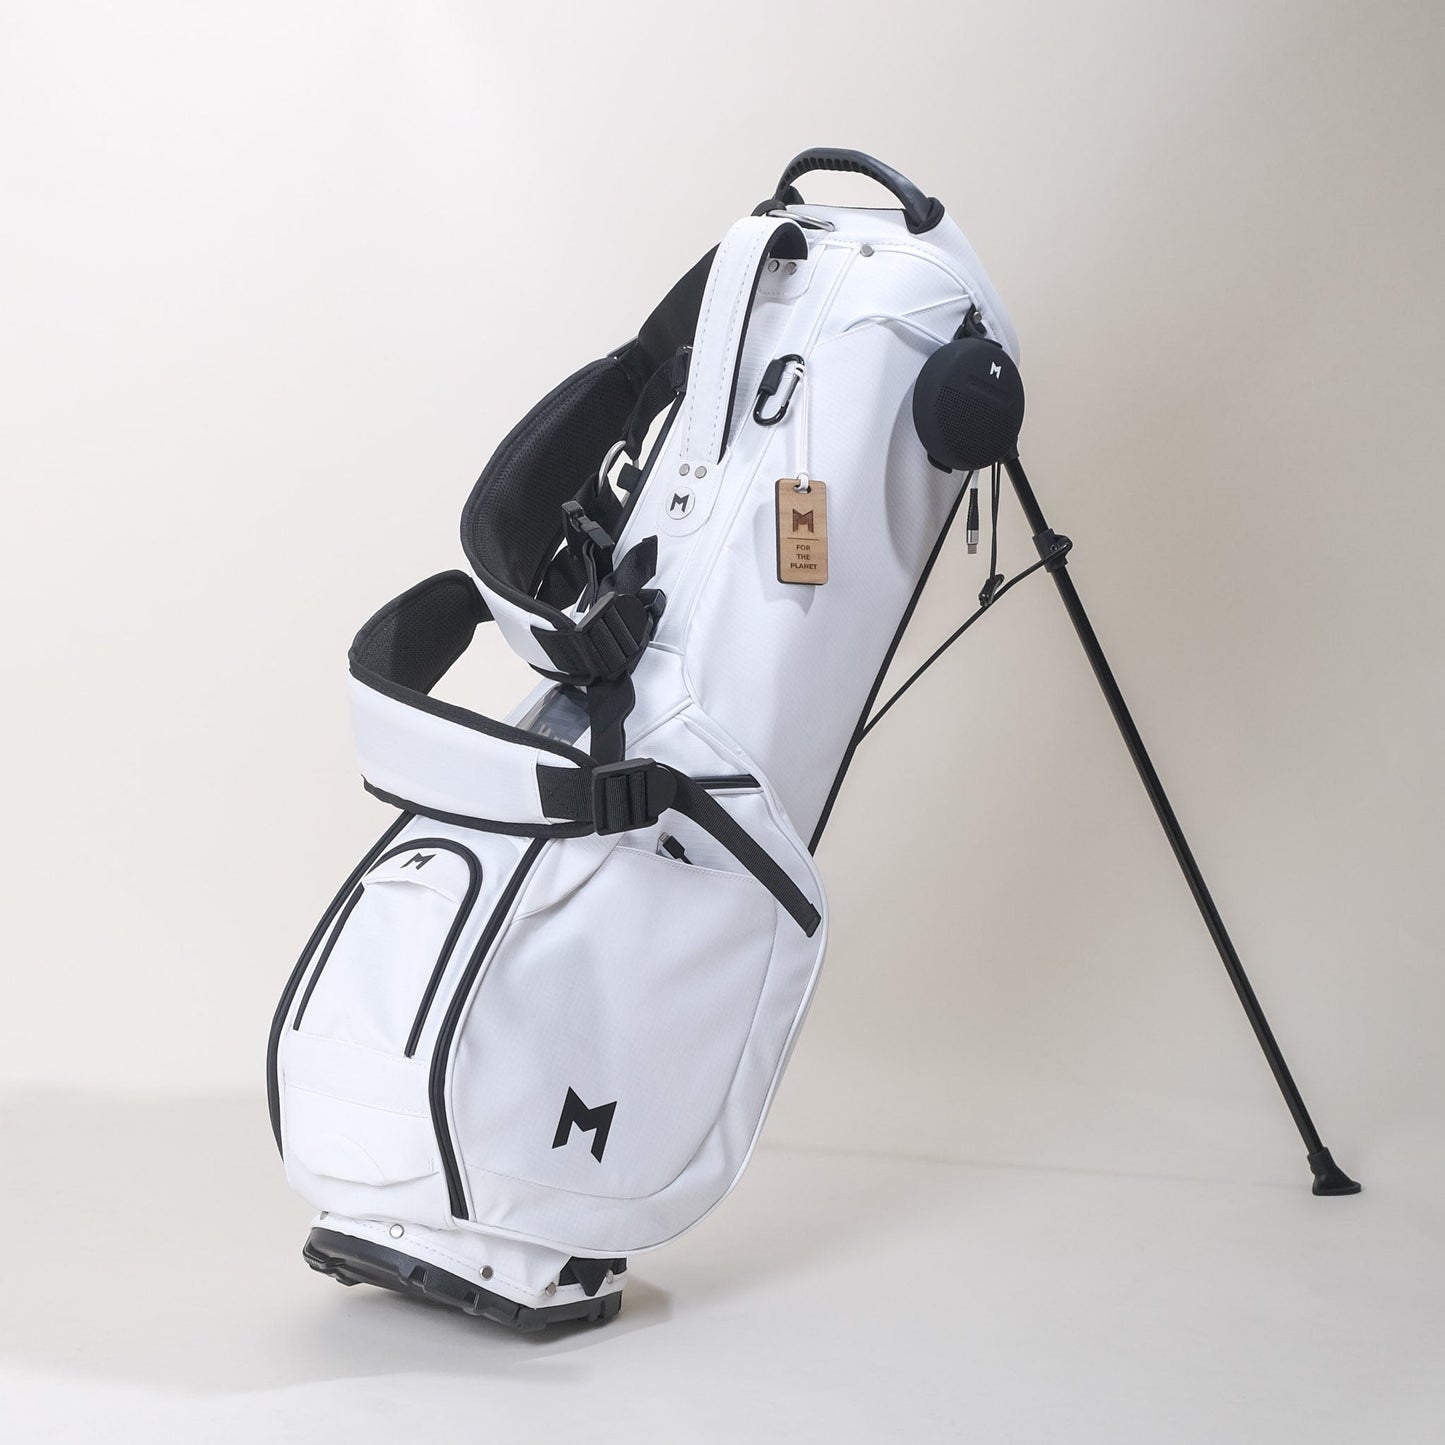 The MNML GOLF MR1, in white, is a standout with contrasting black detail.